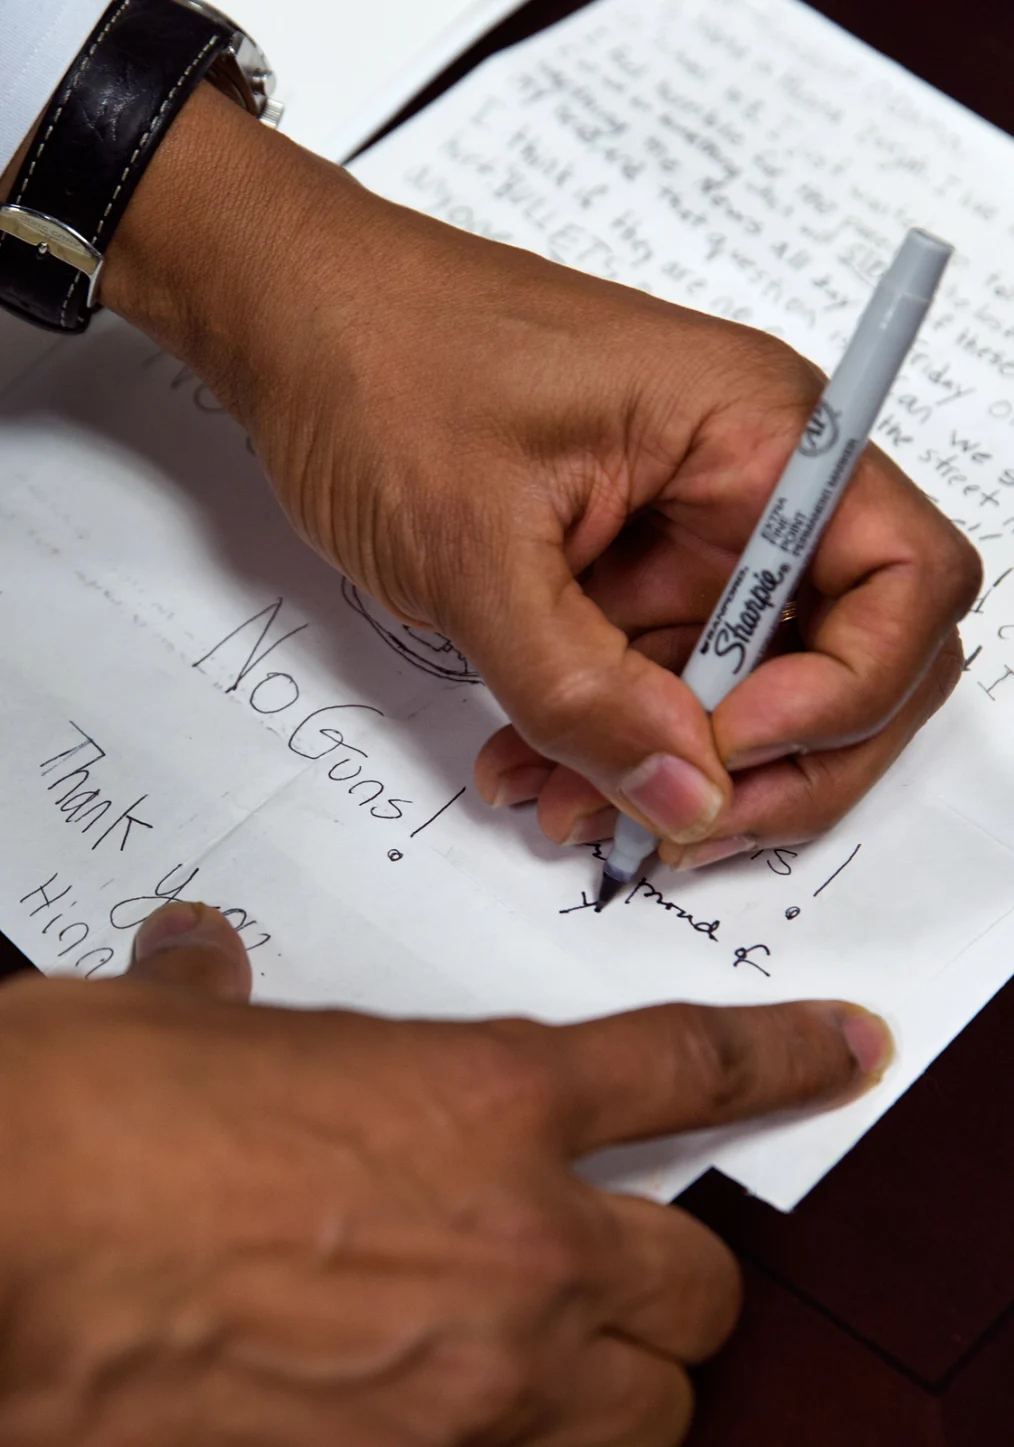 There is a hand with a medium-deep skin tone writing on a sheet of paper using a thin black sharpie marker. The text on the paper that stands out is "No Guns!"